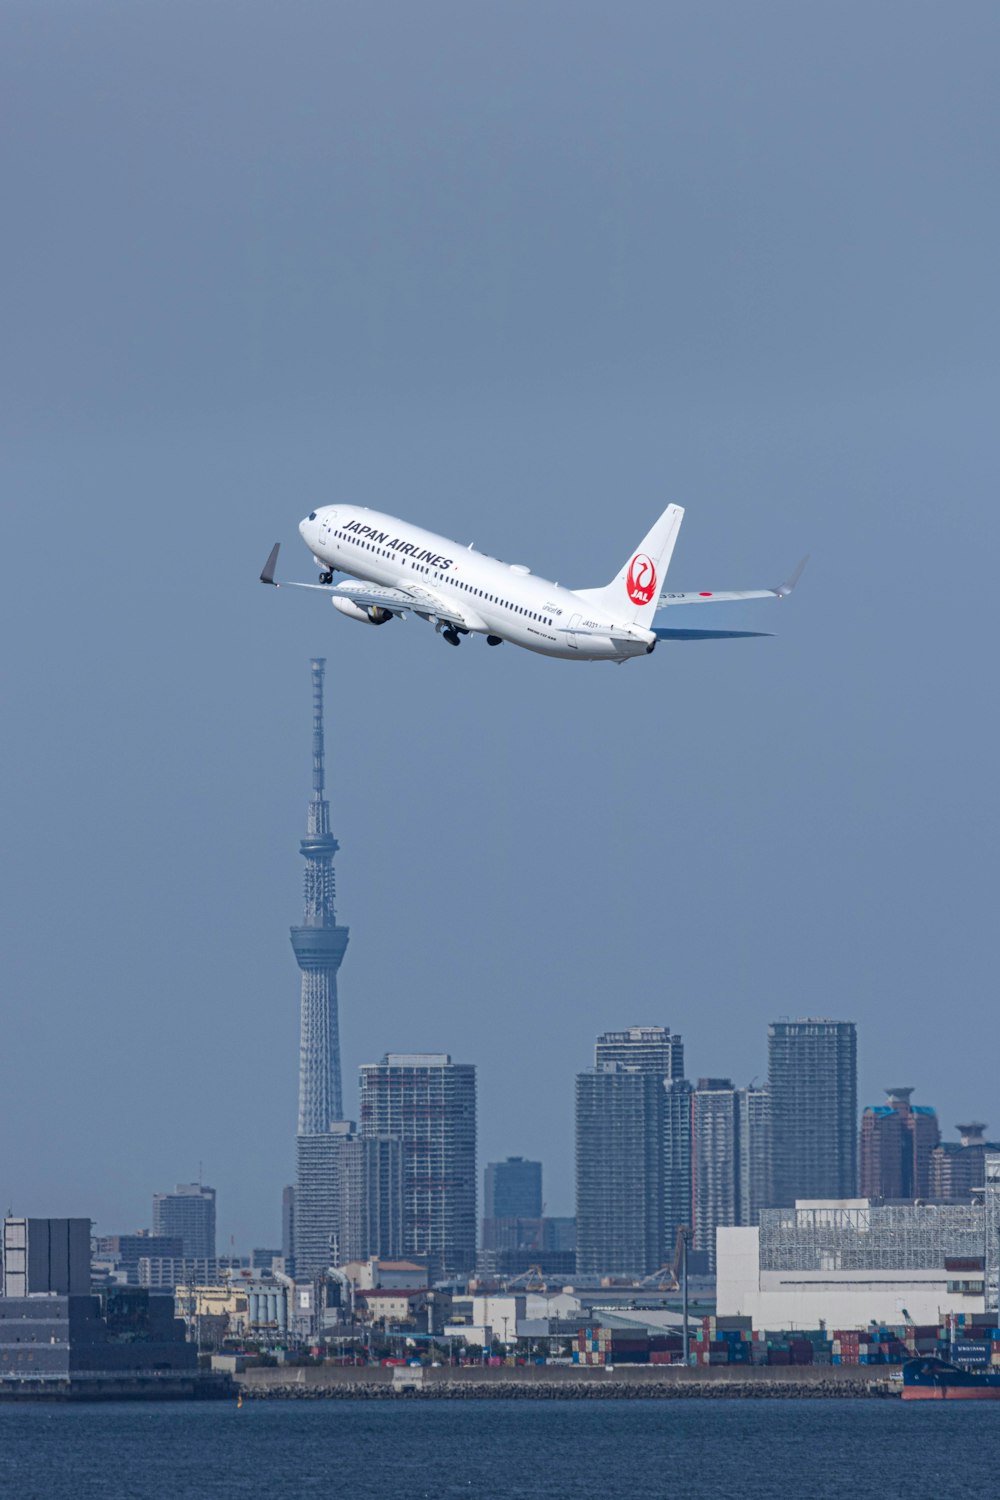 a large passenger jet flying over a city